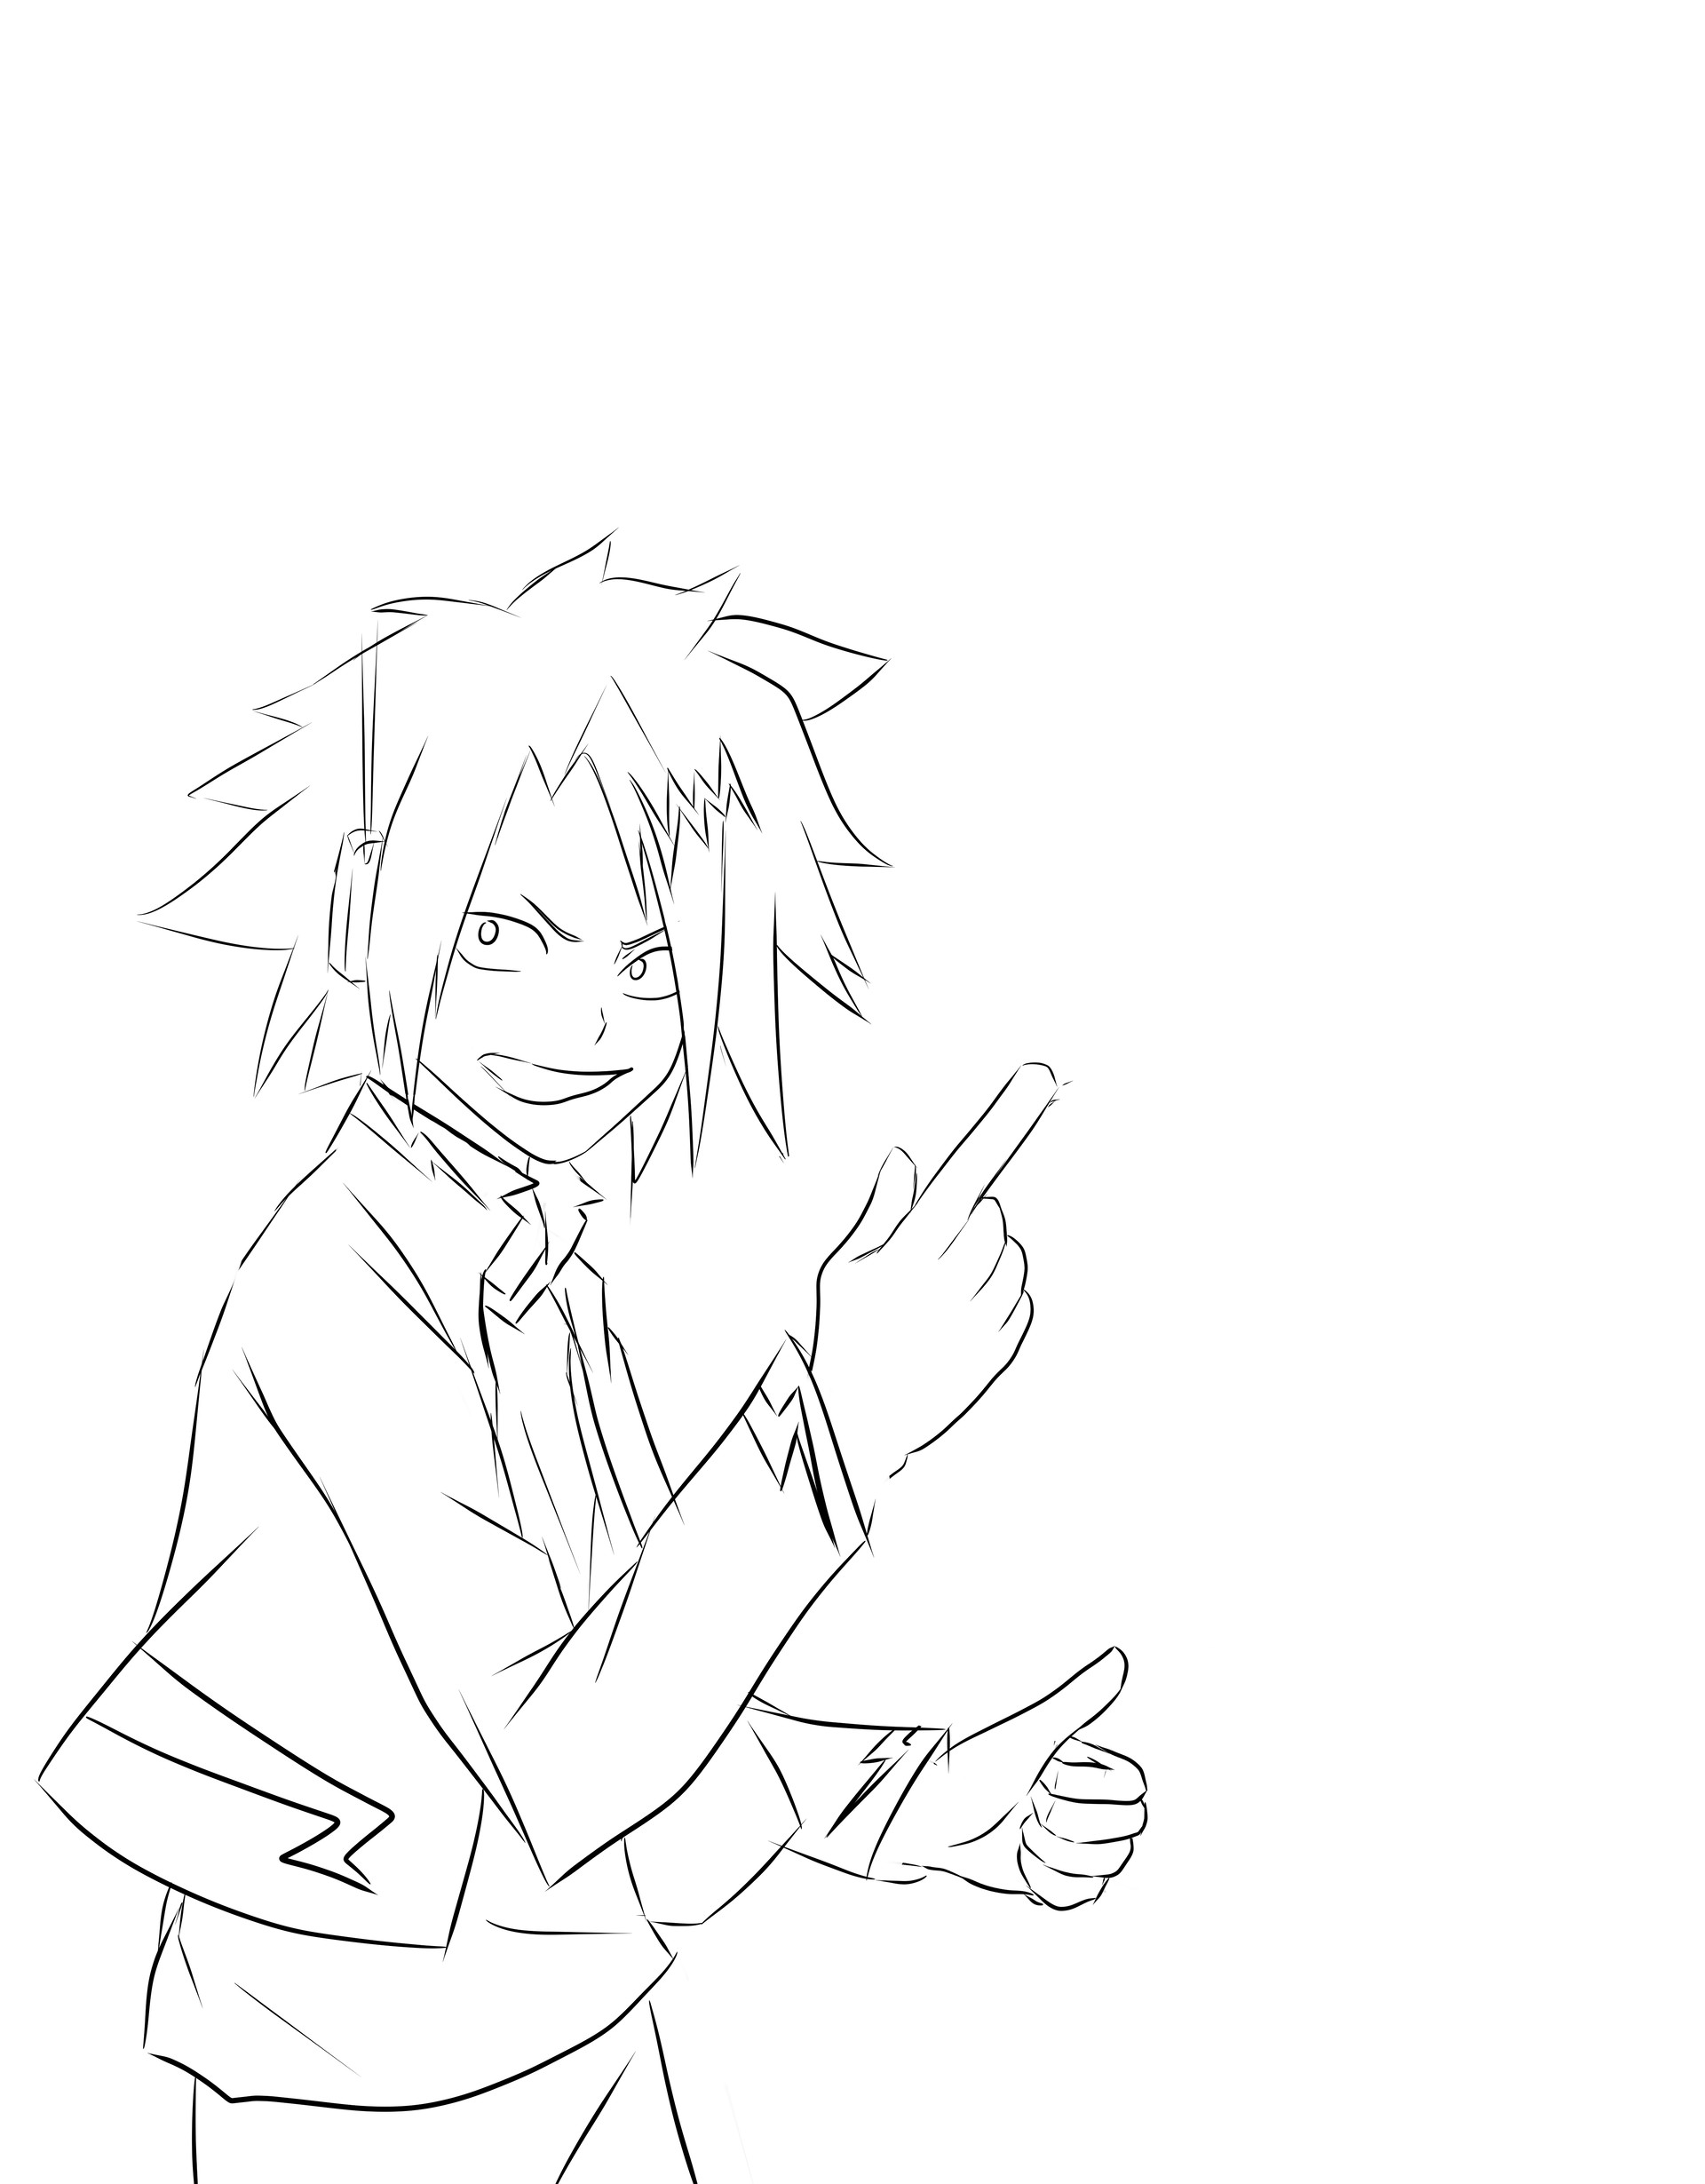 Mha Drawings Easy Denki / The way to begin and finish your sketches,  clearly shown step by step.